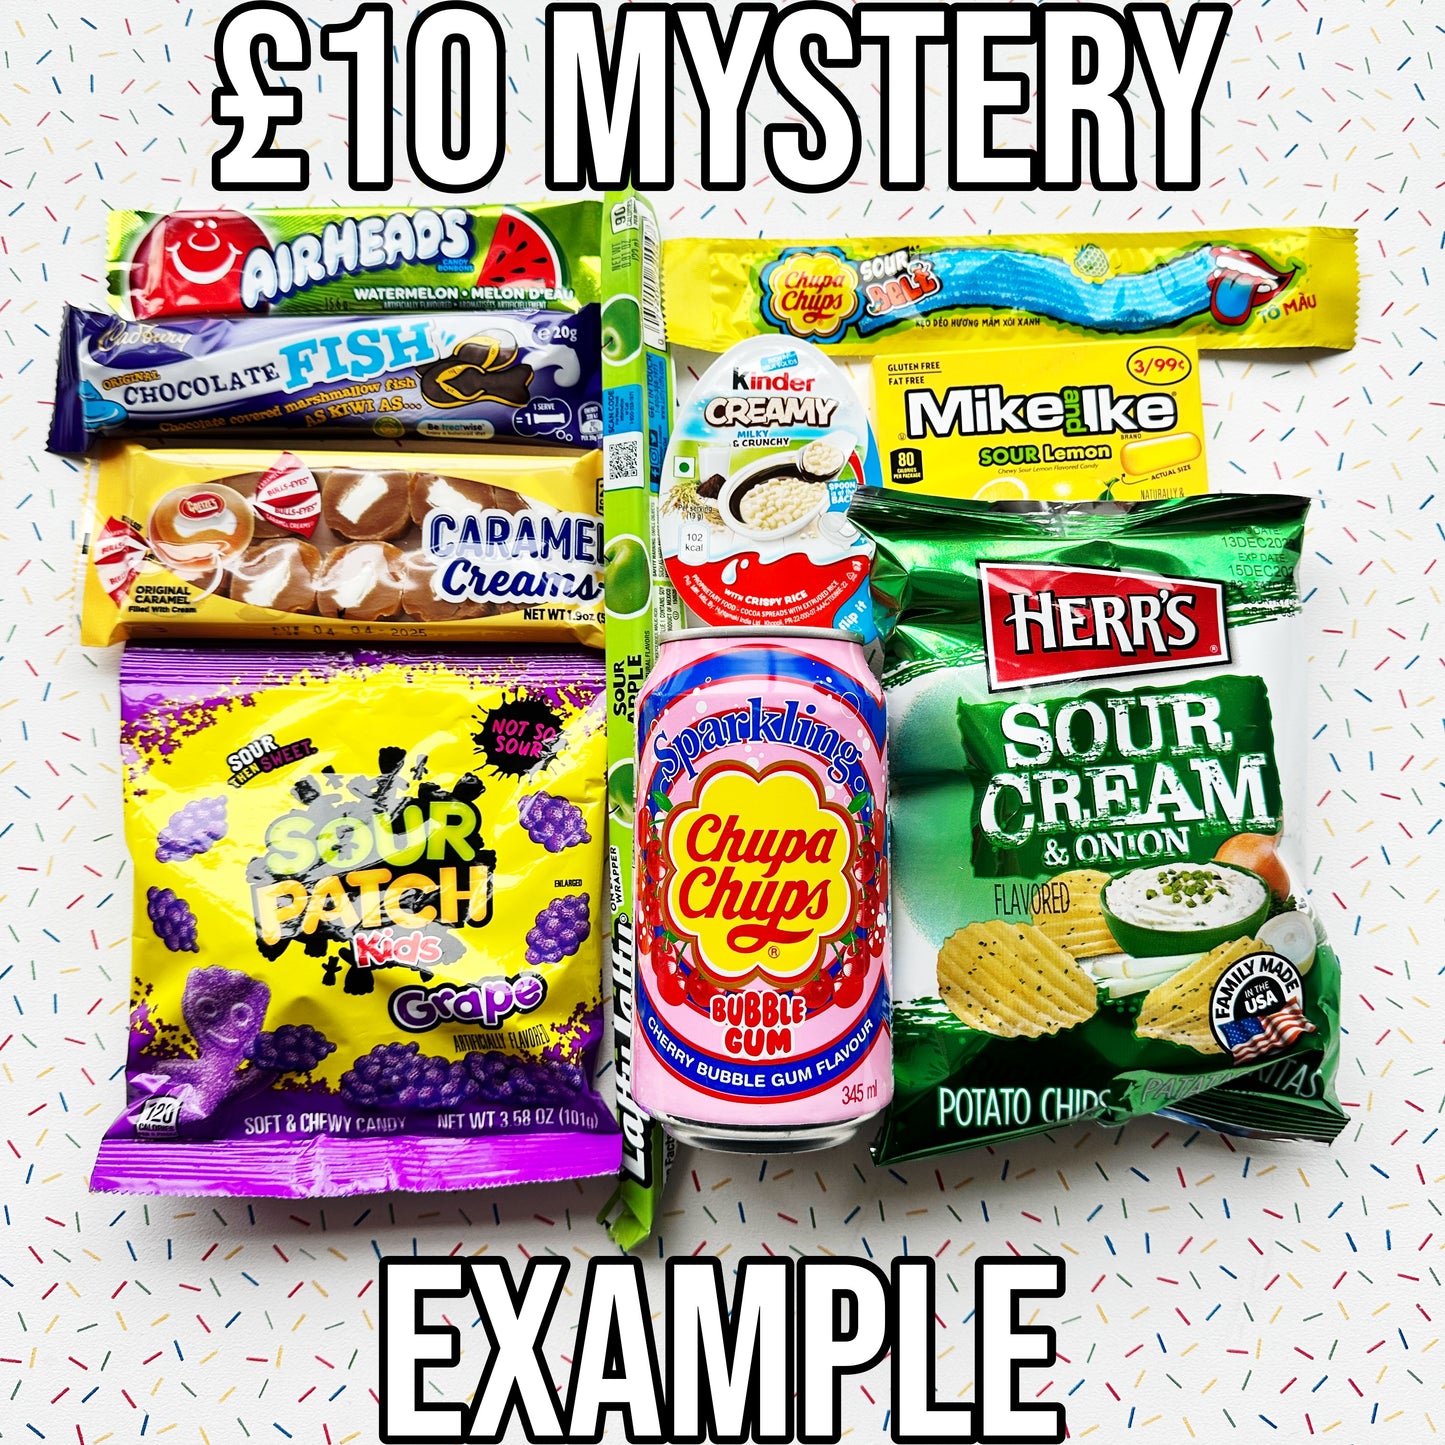 £10 mystery bundle, candy, sweets, chocolate, lollipop, soda, pop, drink, fizzy, crisps, chips, cheese puffs, gift, giftbox, cheetos, sour patch kids, blue raspberry, cookie dough, mike and ike, cherry, m&ms, white chocolate, jolly ranchers, cow tales, brownie, nerds, 3 musketeers, herrs, jalapeno, baby ruth, milkybar choo